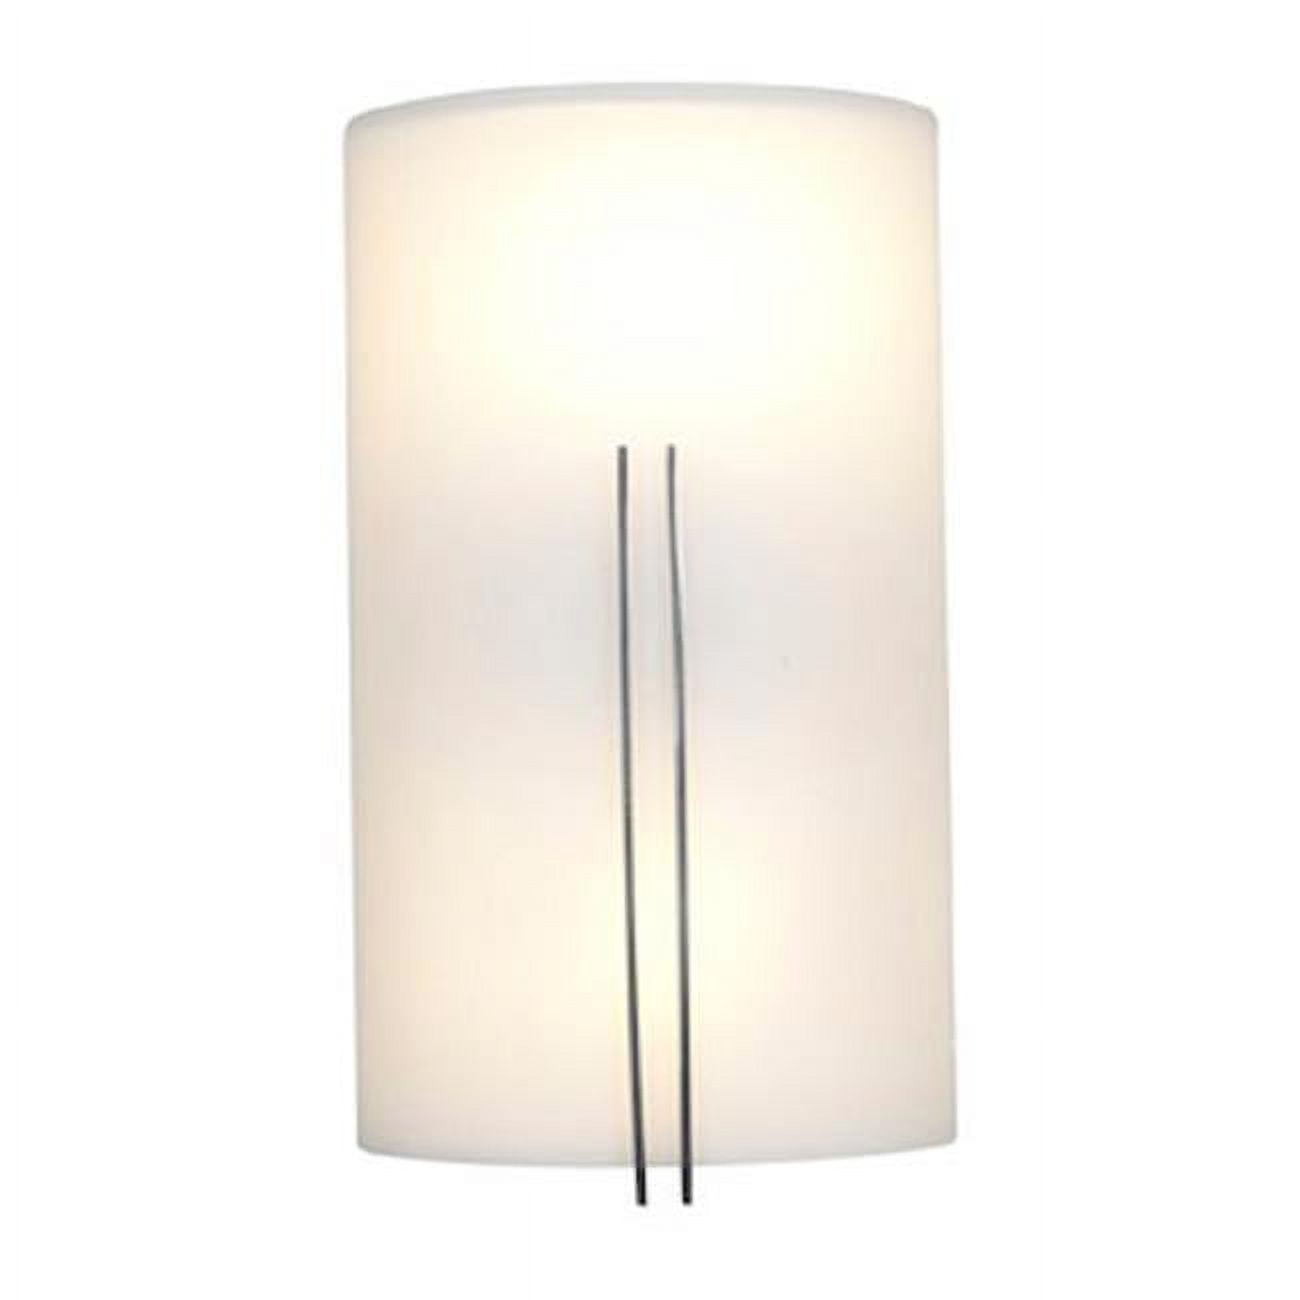 Picture of Access Lighting 20446-BS-WHT 2 Light Prong Vanity and Wall Sconce - Brushed Steel & White